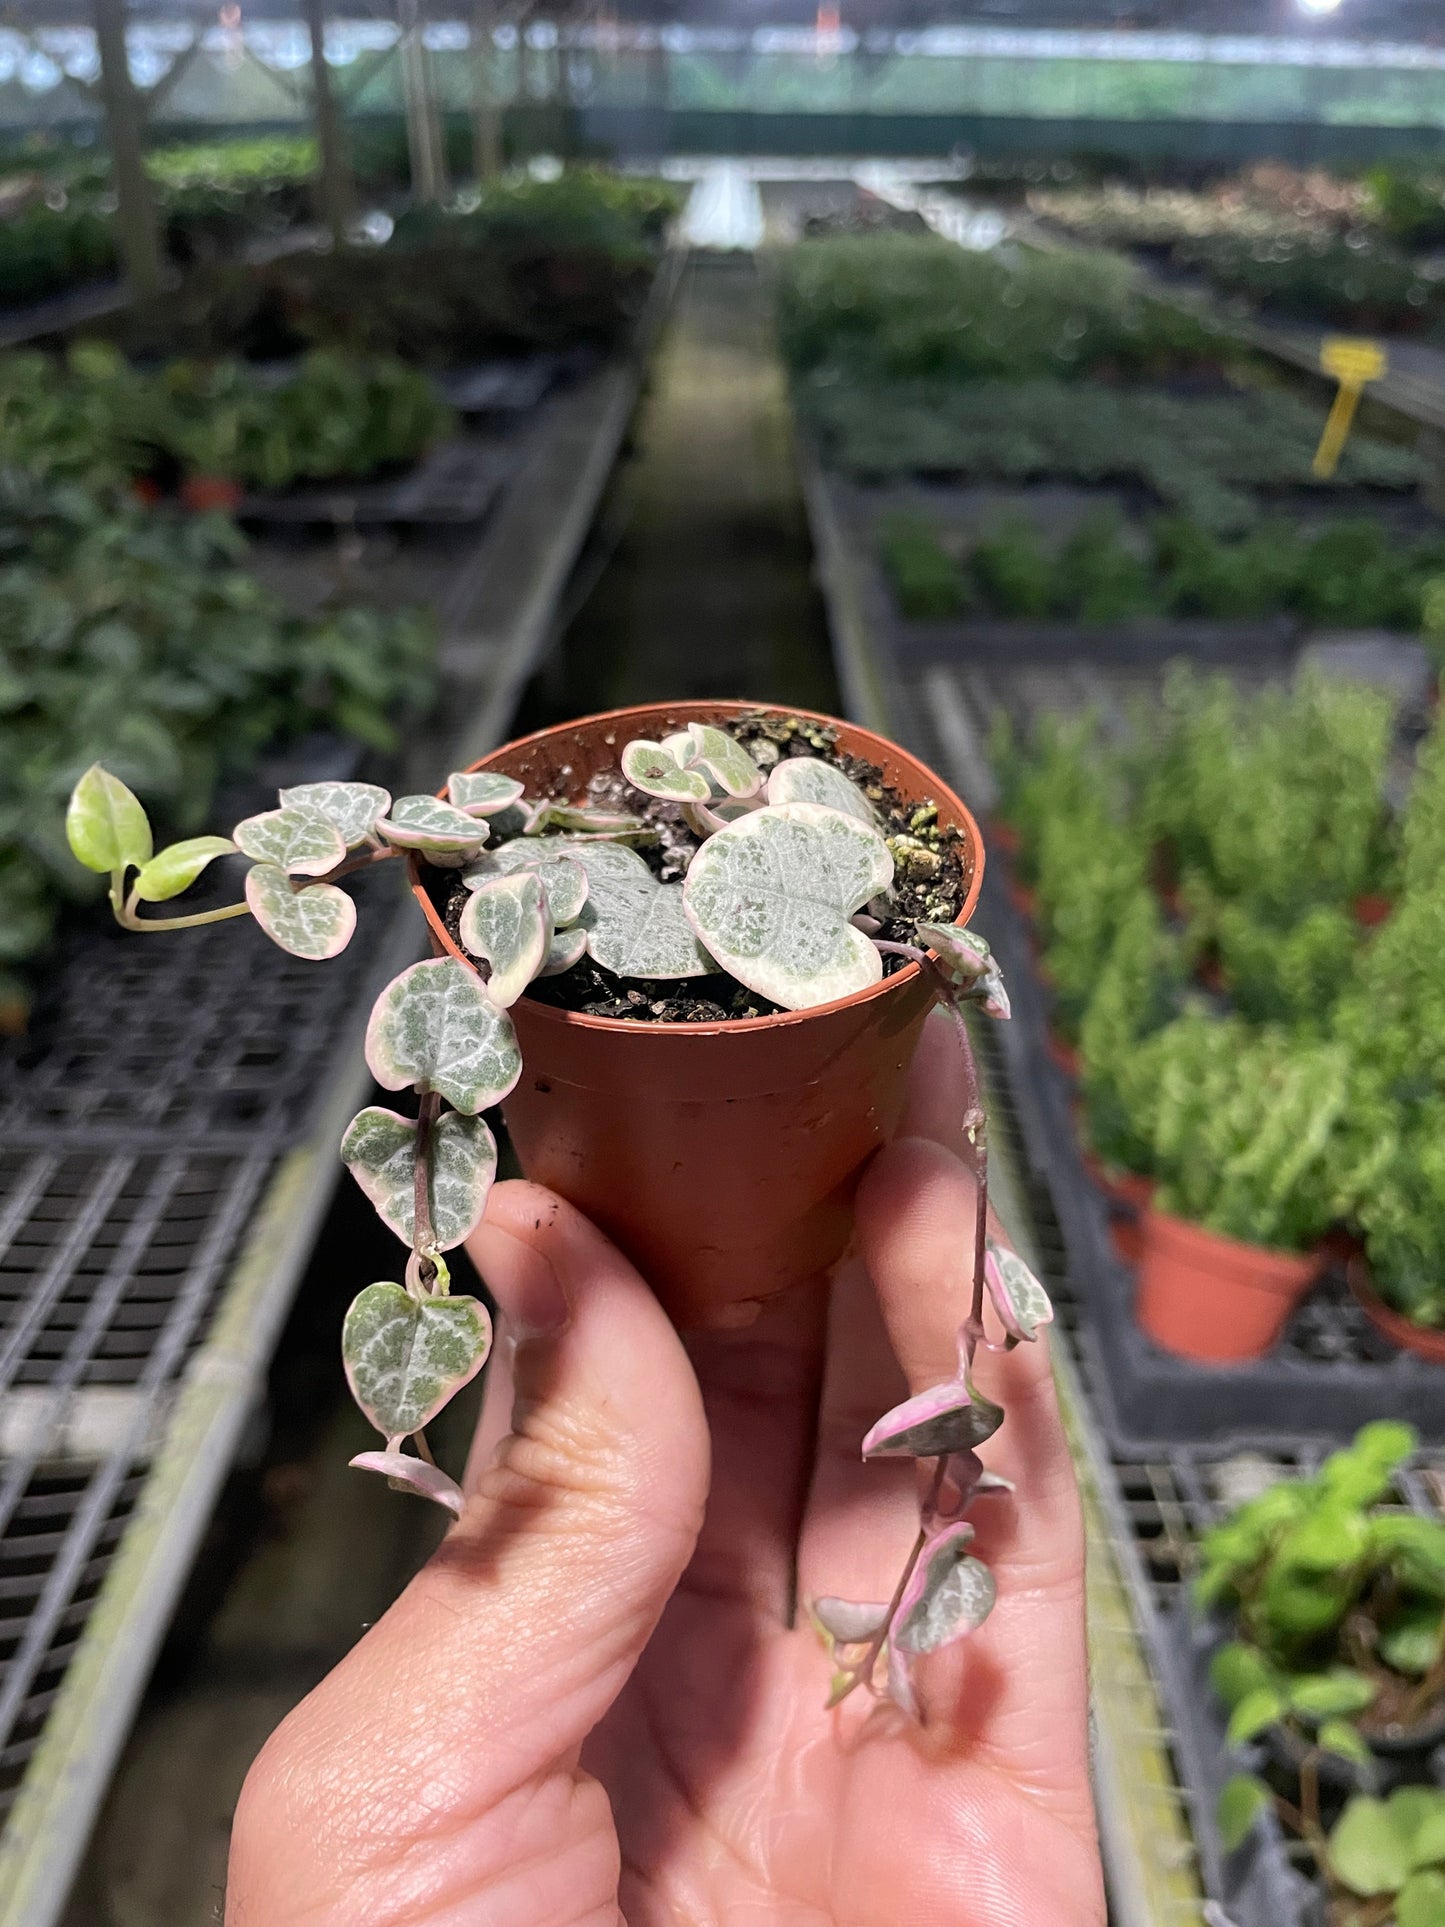 String of Hearts Variegated (Ceropegia Woodii)- Stunning, Trailing Variegated Heart Shaped Leaves- Tropical Houseplant